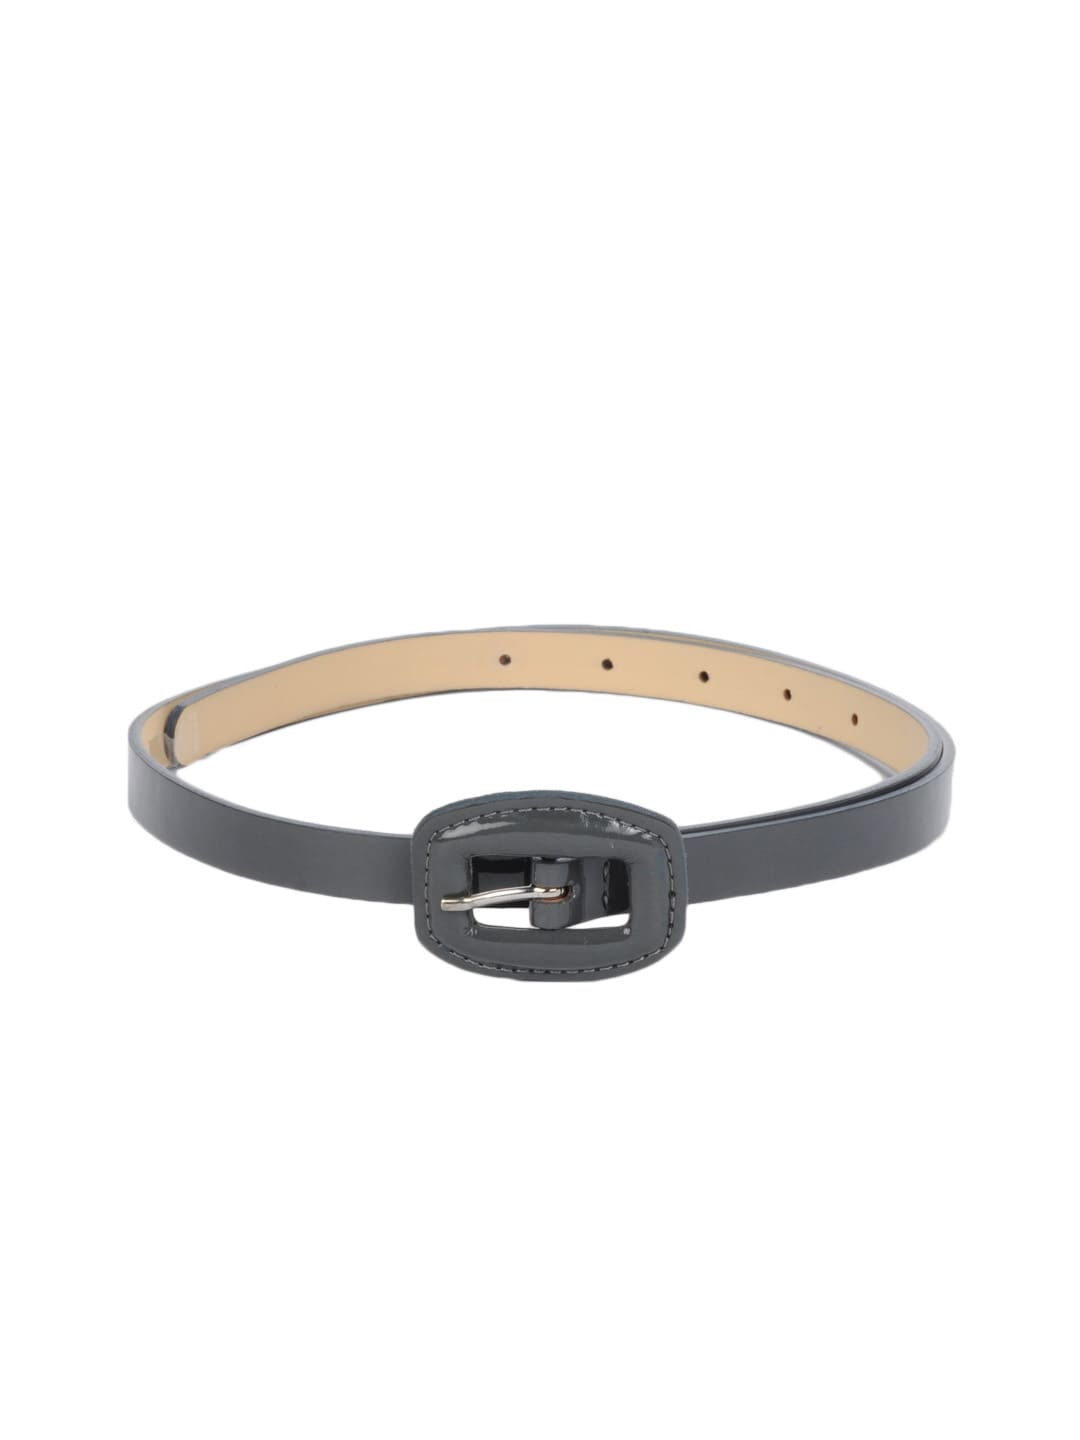 French Connection Women Grey Belt